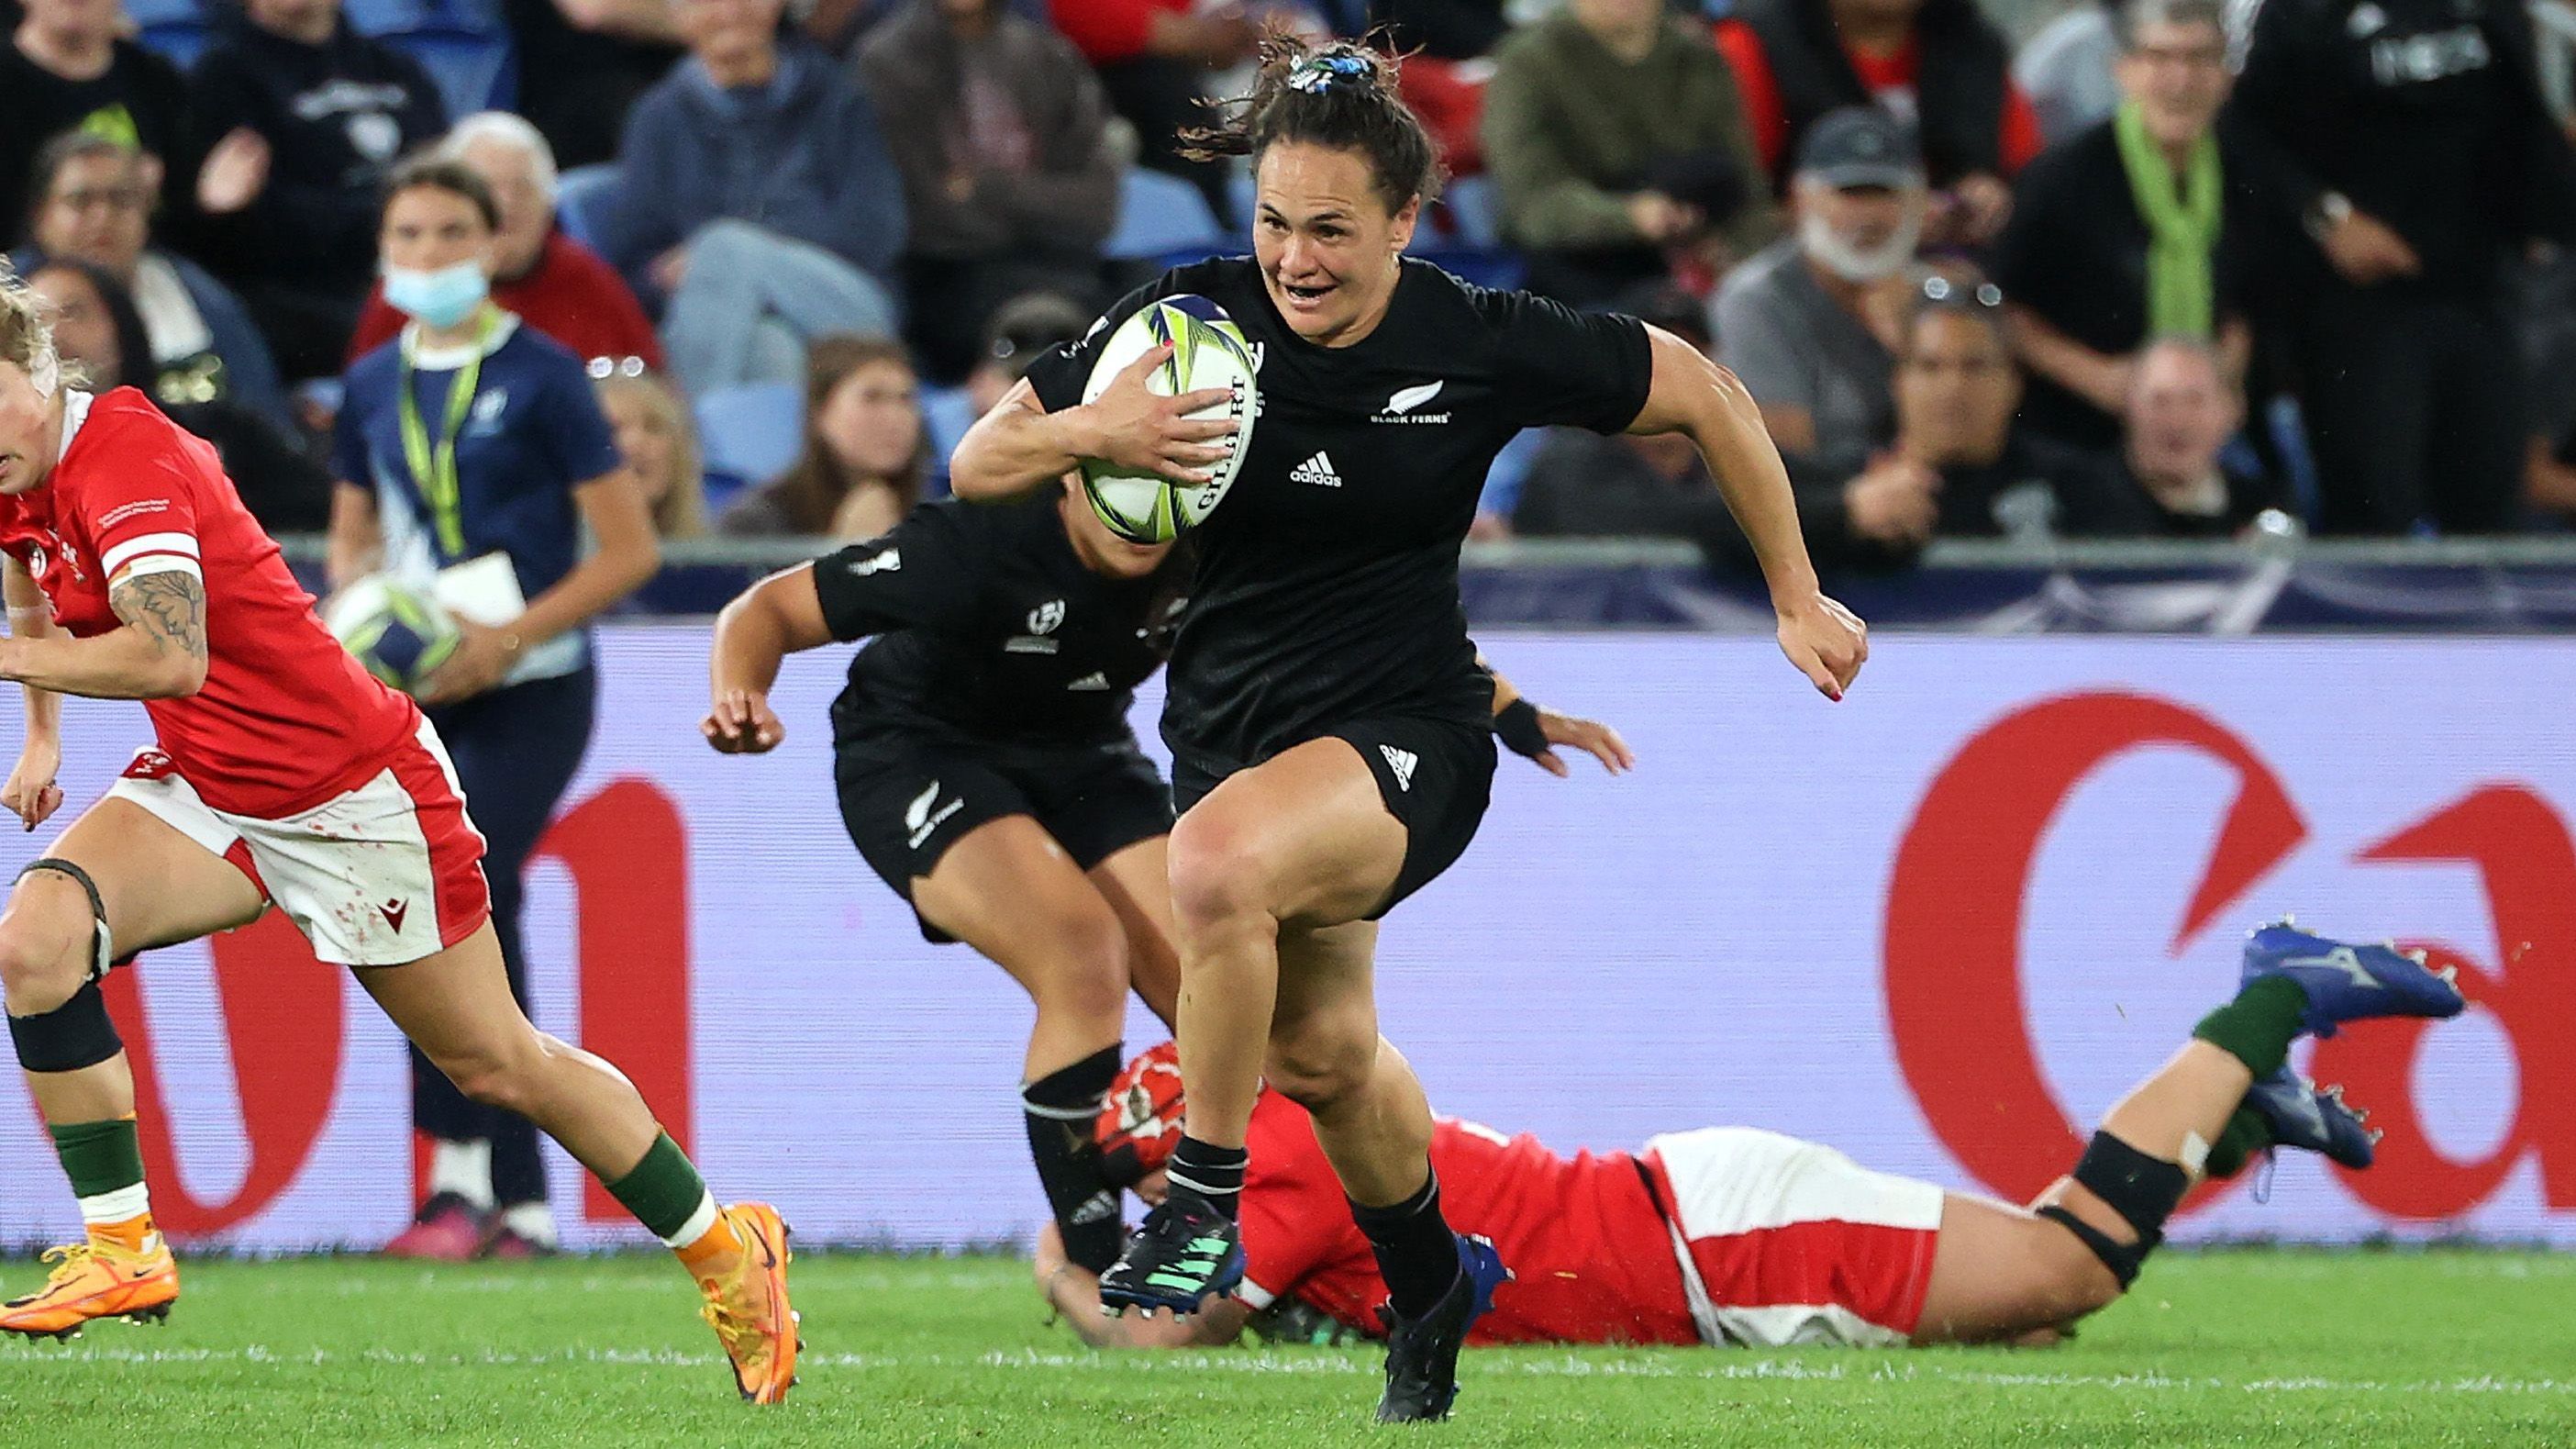 Portia Woodman of New Zealand runs the ball on her way to a try during the Rugby World Cup quarter-final against Wales.